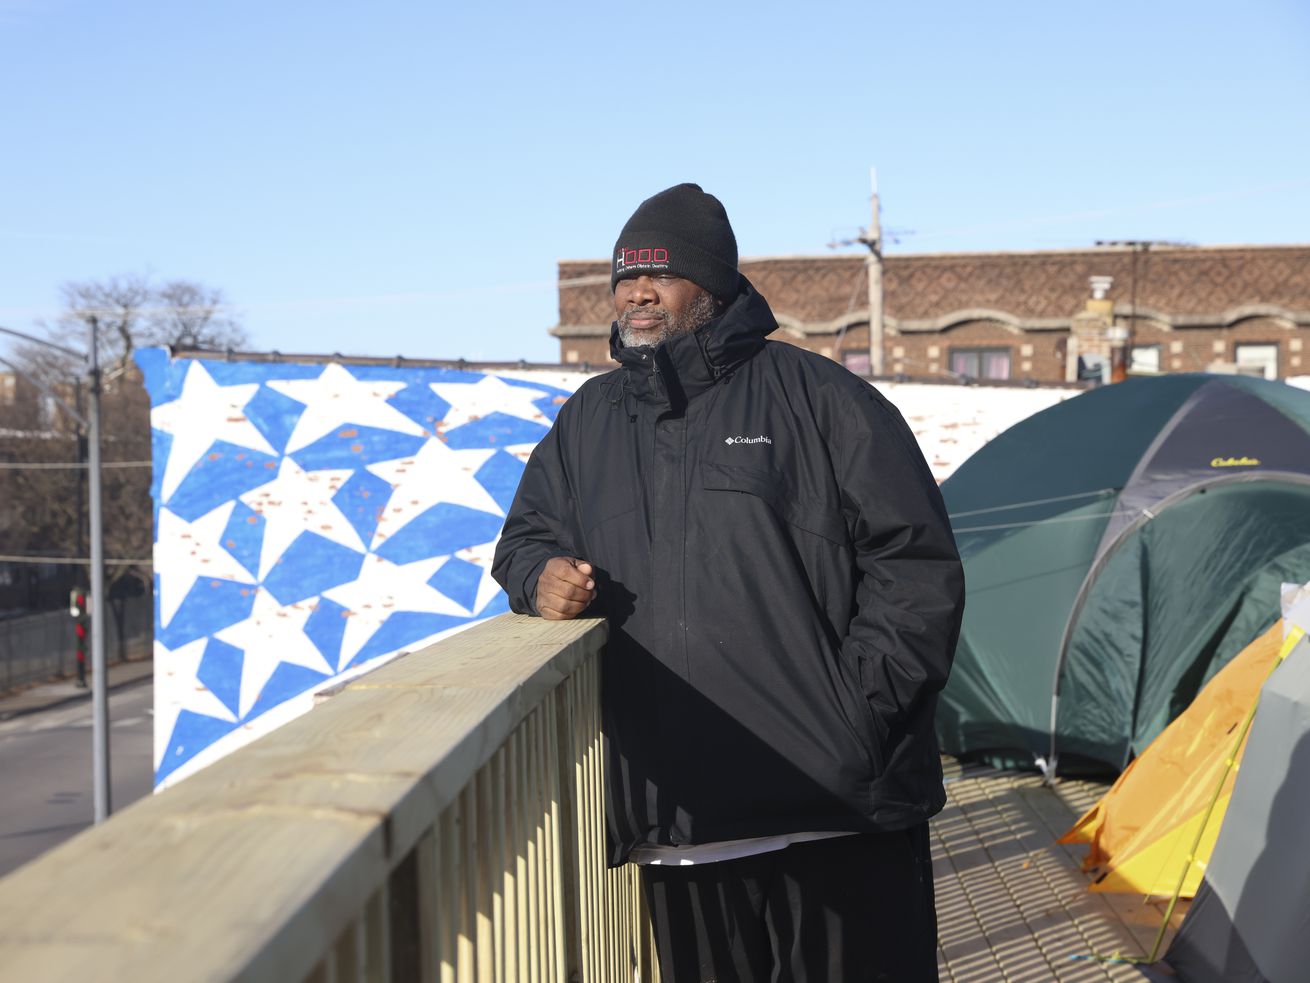 On Nov. 20, Pastor Corey Brooks, founder of Project H.O.O.D., began a 100 day campout at 6615 S King Dr in West Woodlawn. His goal is to bring attention to the violence and poverty of the area and to raise money for a new resource center.